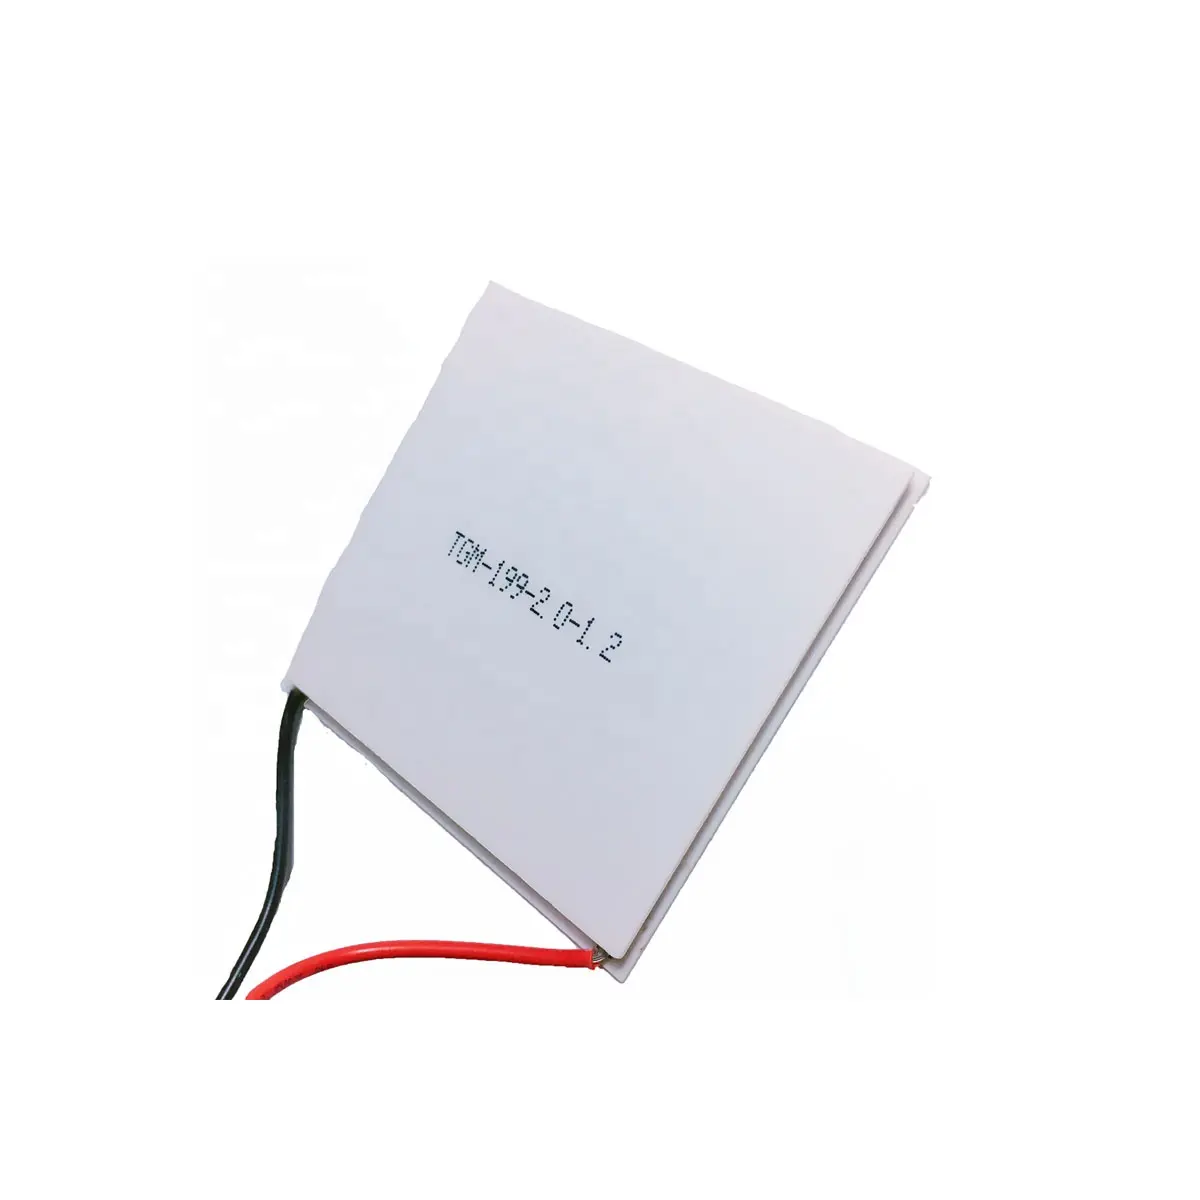 Taidacent Thermal Power Generation Module TGM-199-2.0-1.2 62*62MM 7V 4.8A Temperature 260 Degrees Thermoelectric Power Module